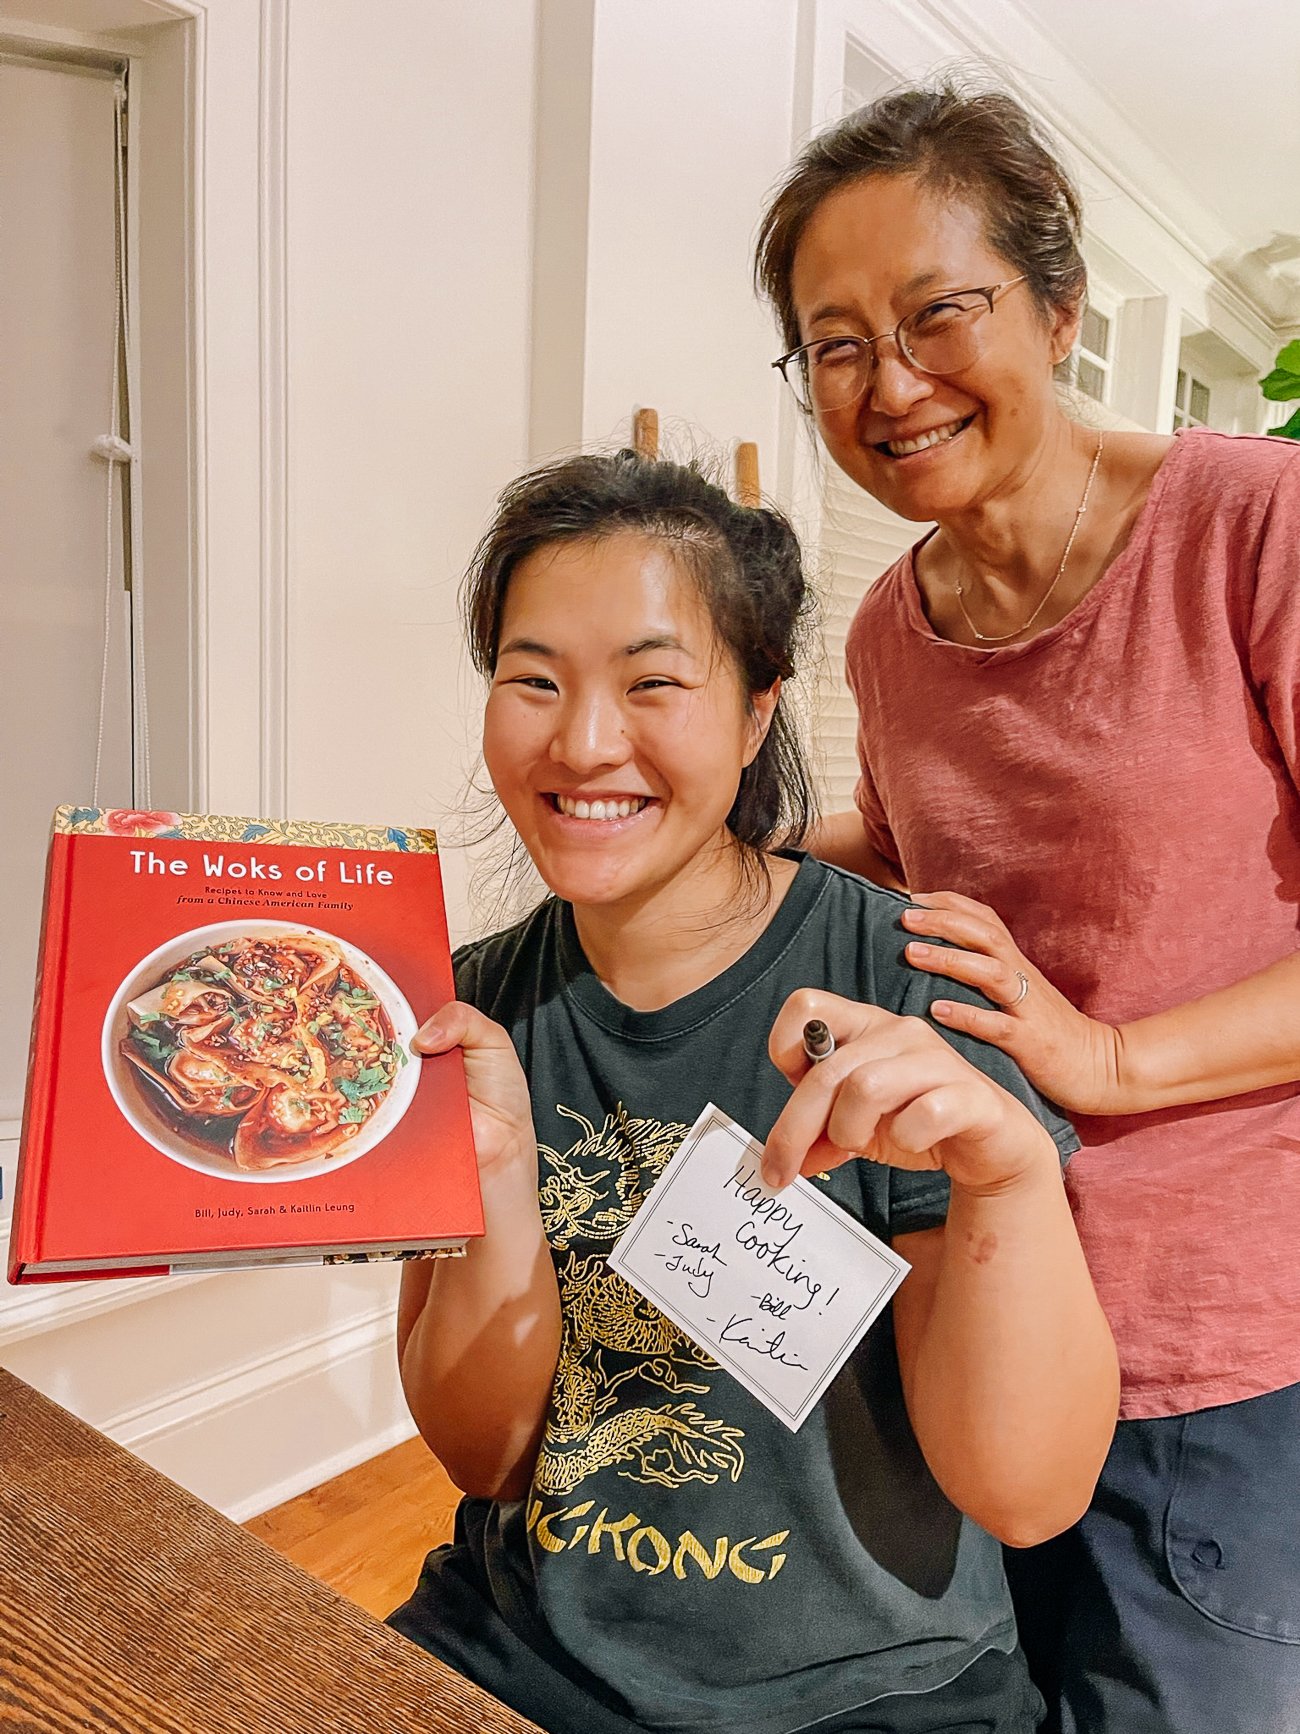 Sarah and Judy with The Woks of Life cookbook and signed book plate